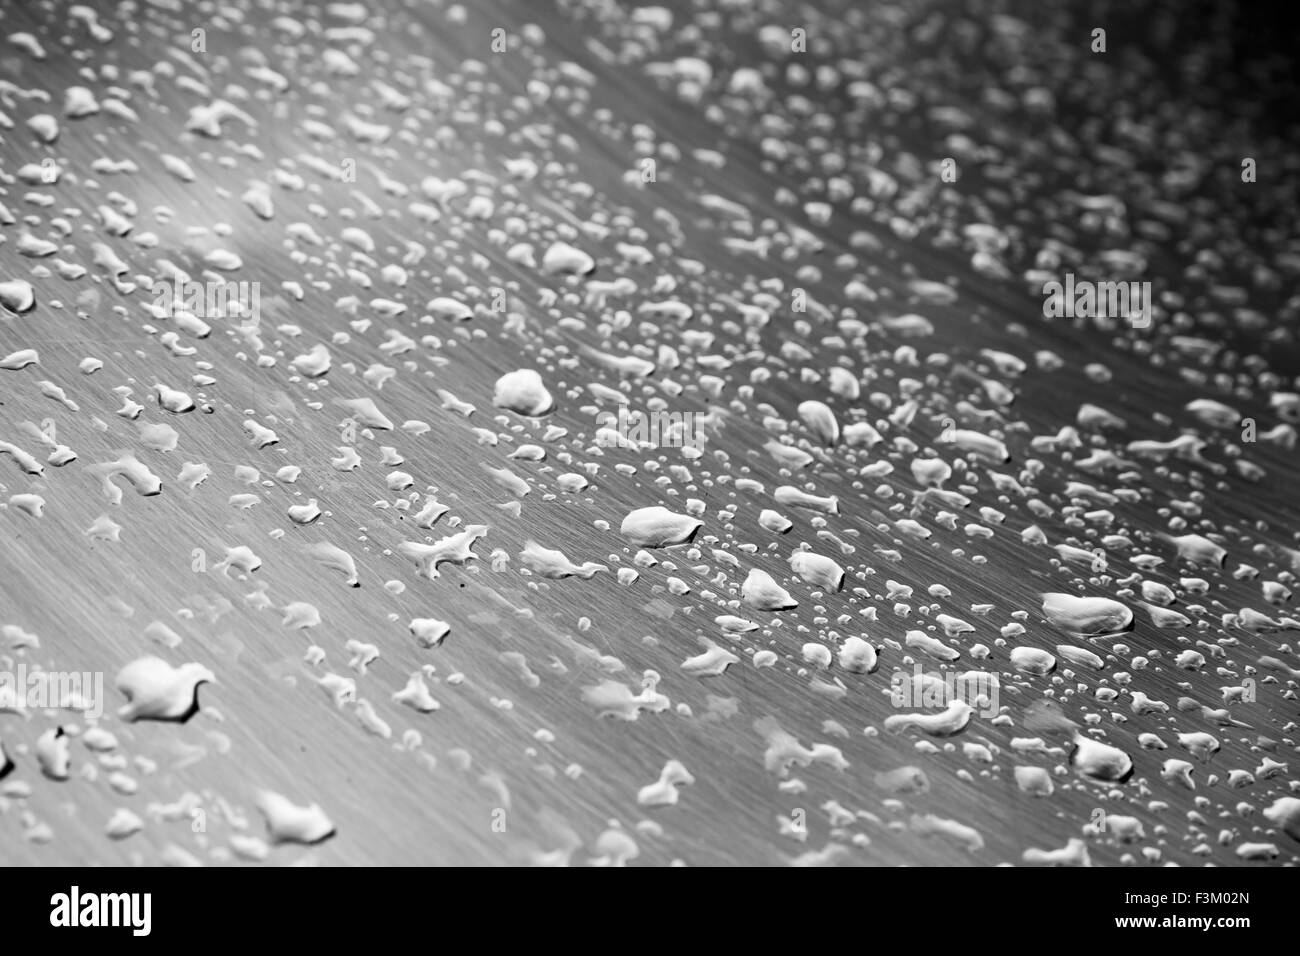 Stainless steel surface with water drops, monochrome photo with selective focus Stock Photo